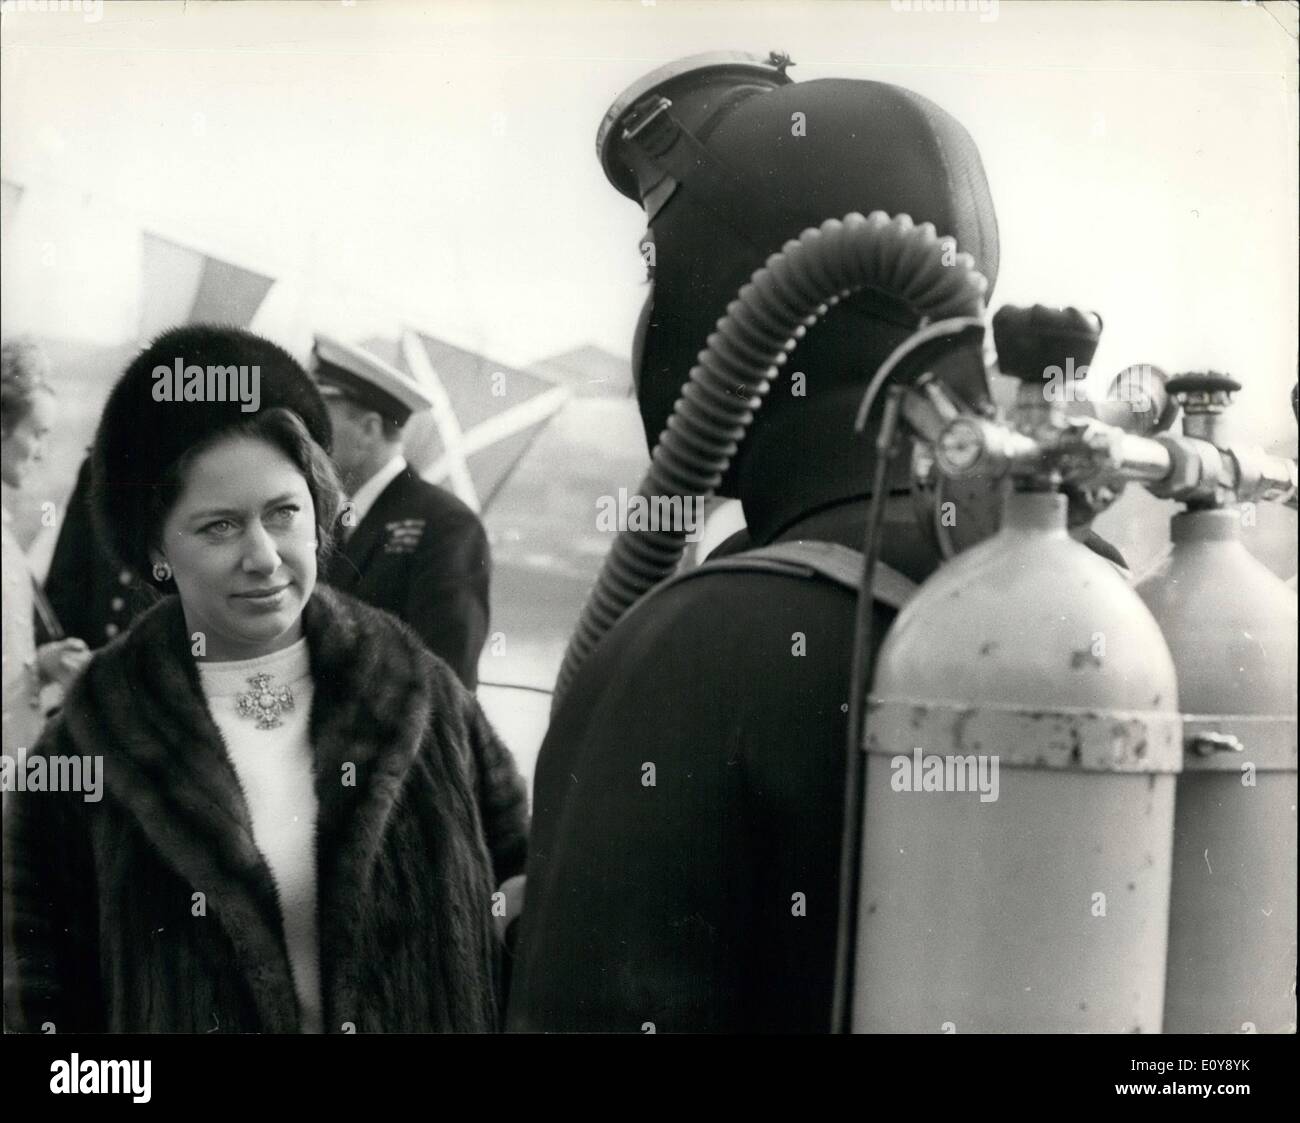 Feb. 02, 1969 - Princess Margaret visits NATO standing Naval Forces ships in the Thames: Warships of the Nato Standing Naval Force Atlantic, are berthed in the Thames during their six day visit to London. It is the first visit of Force's ships to London and coincides with the twentieth anniversary year of NATO. Today, Princess Margaret went on board four ships in the Albion Dock, Surrey Commercial Dock. They are the Netherlands flagship of the Force, the frigate Van Nes the Norwegian frigates Narvik and Stavanger and the Royal Navy frigate Dido Stock Photo